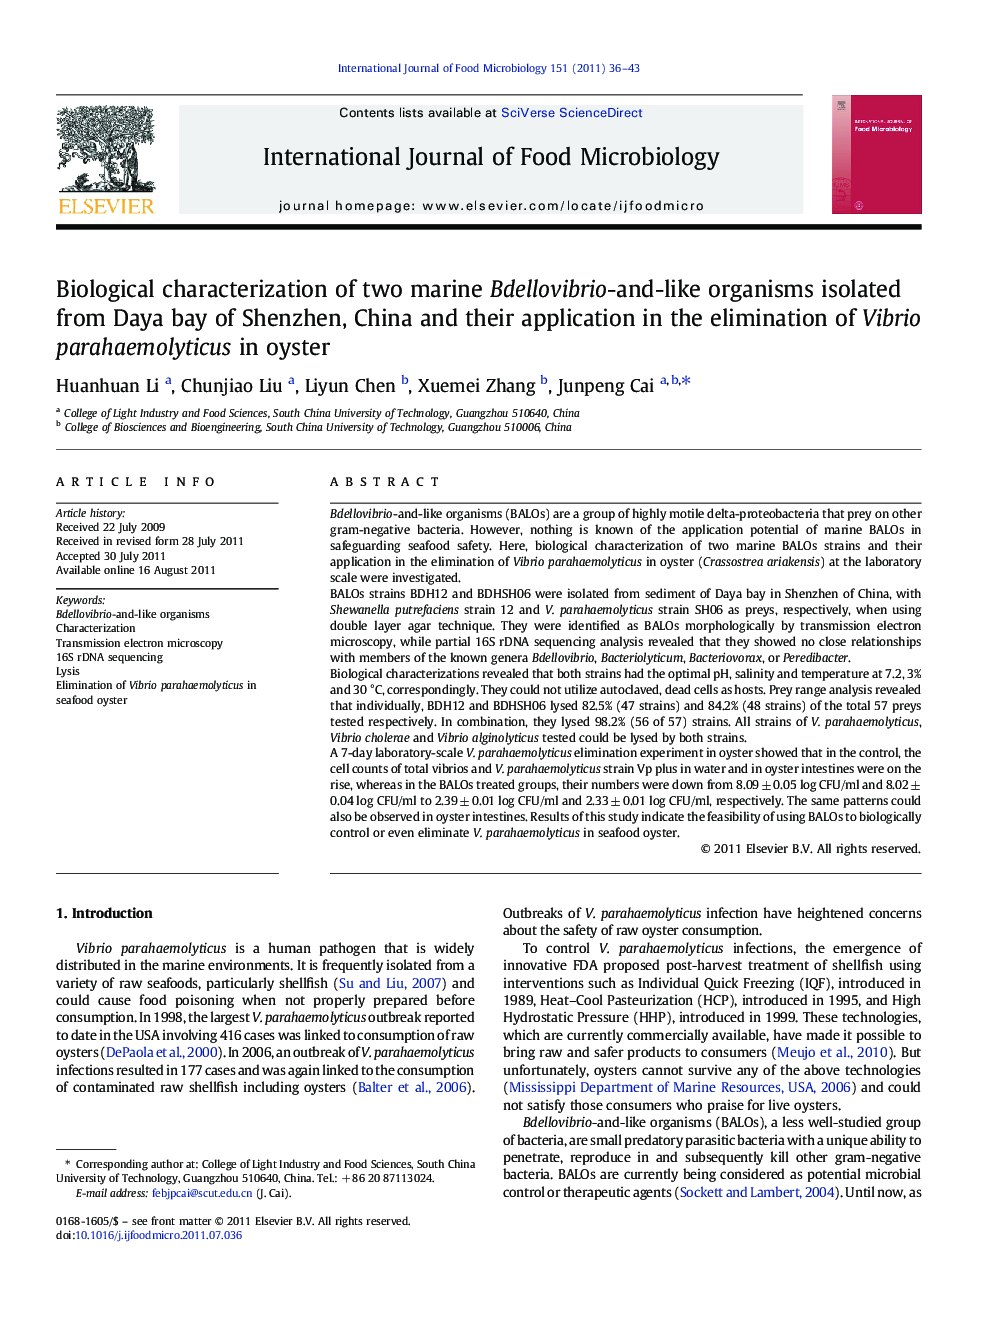 Biological characterization of two marine Bdellovibrio-and-like organisms isolated from Daya bay of Shenzhen, China and their application in the elimination of Vibrio parahaemolyticus in oyster